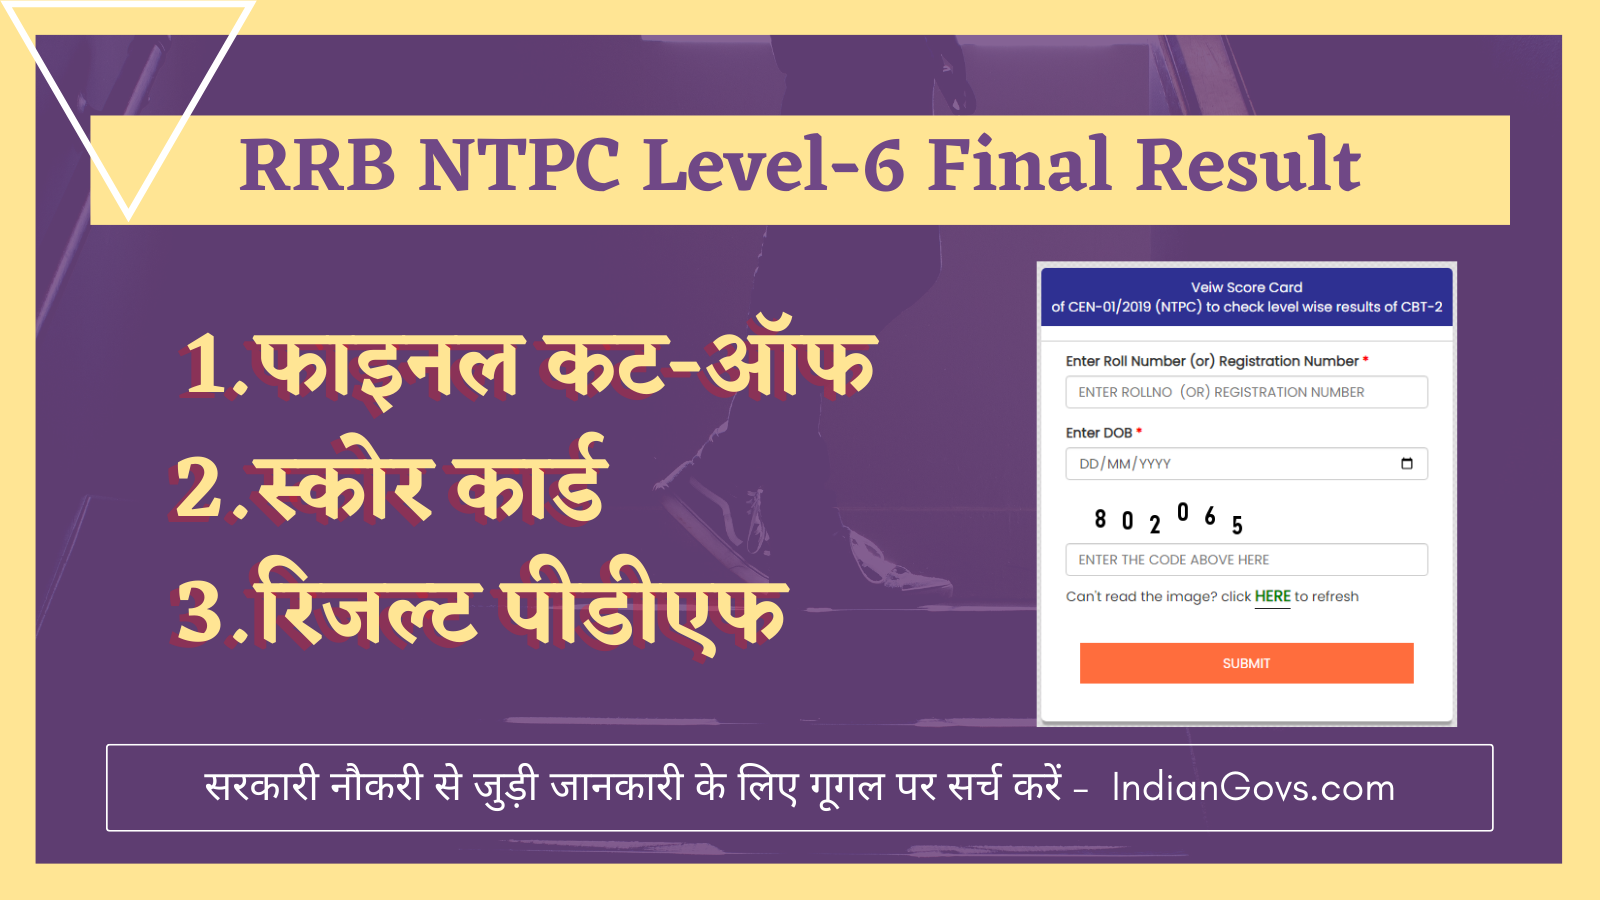 rrb ntpc level 6 final result